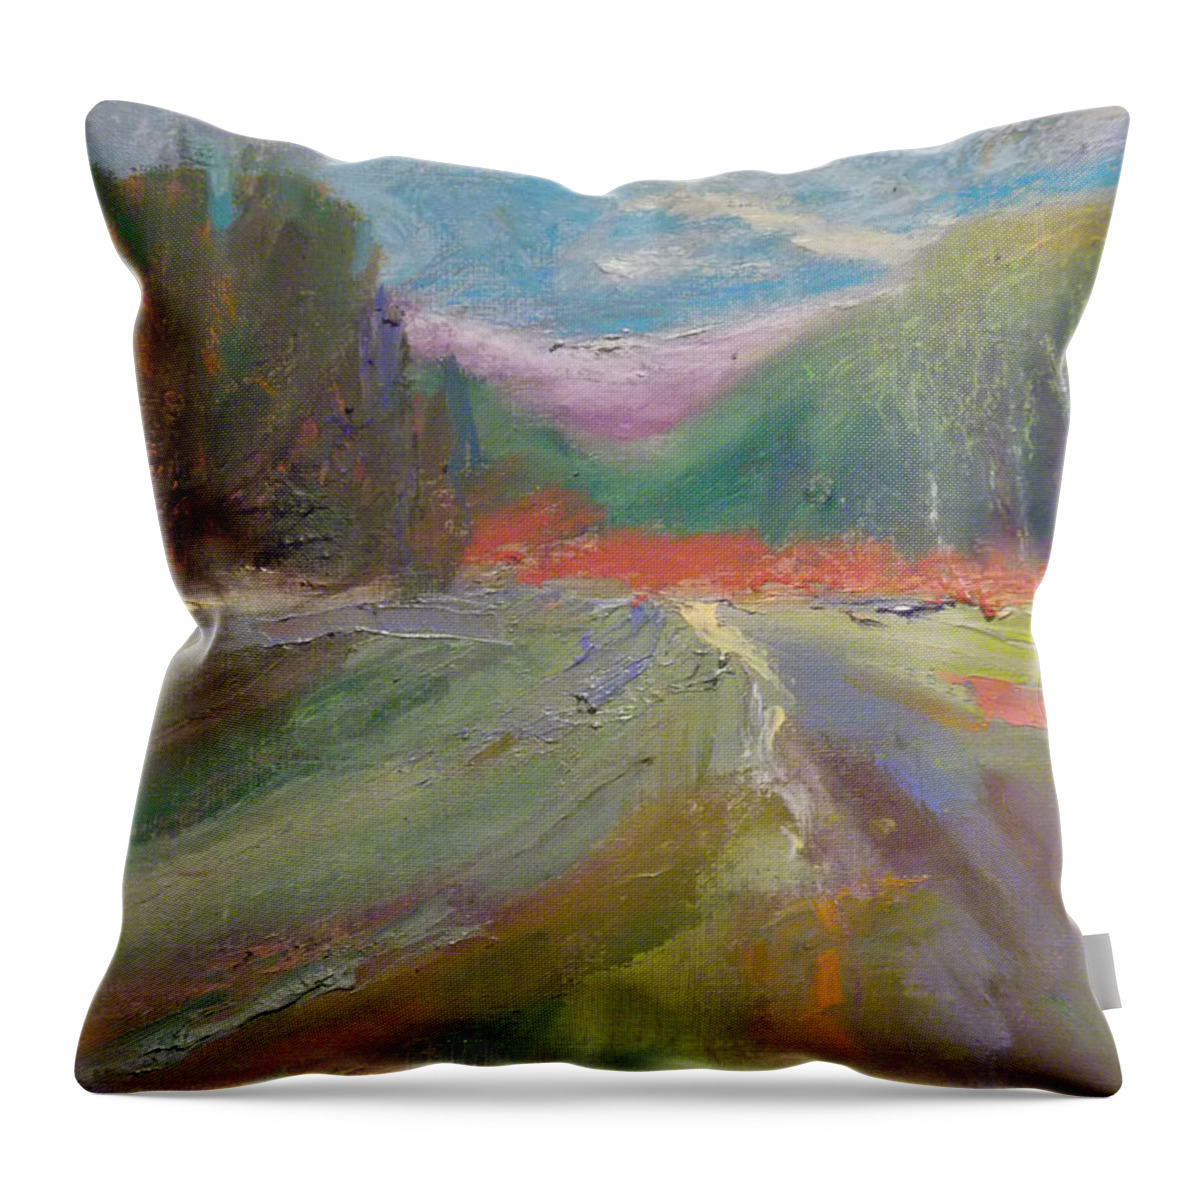 Landscape Throw Pillow featuring the painting Out of Range by Susan Esbensen